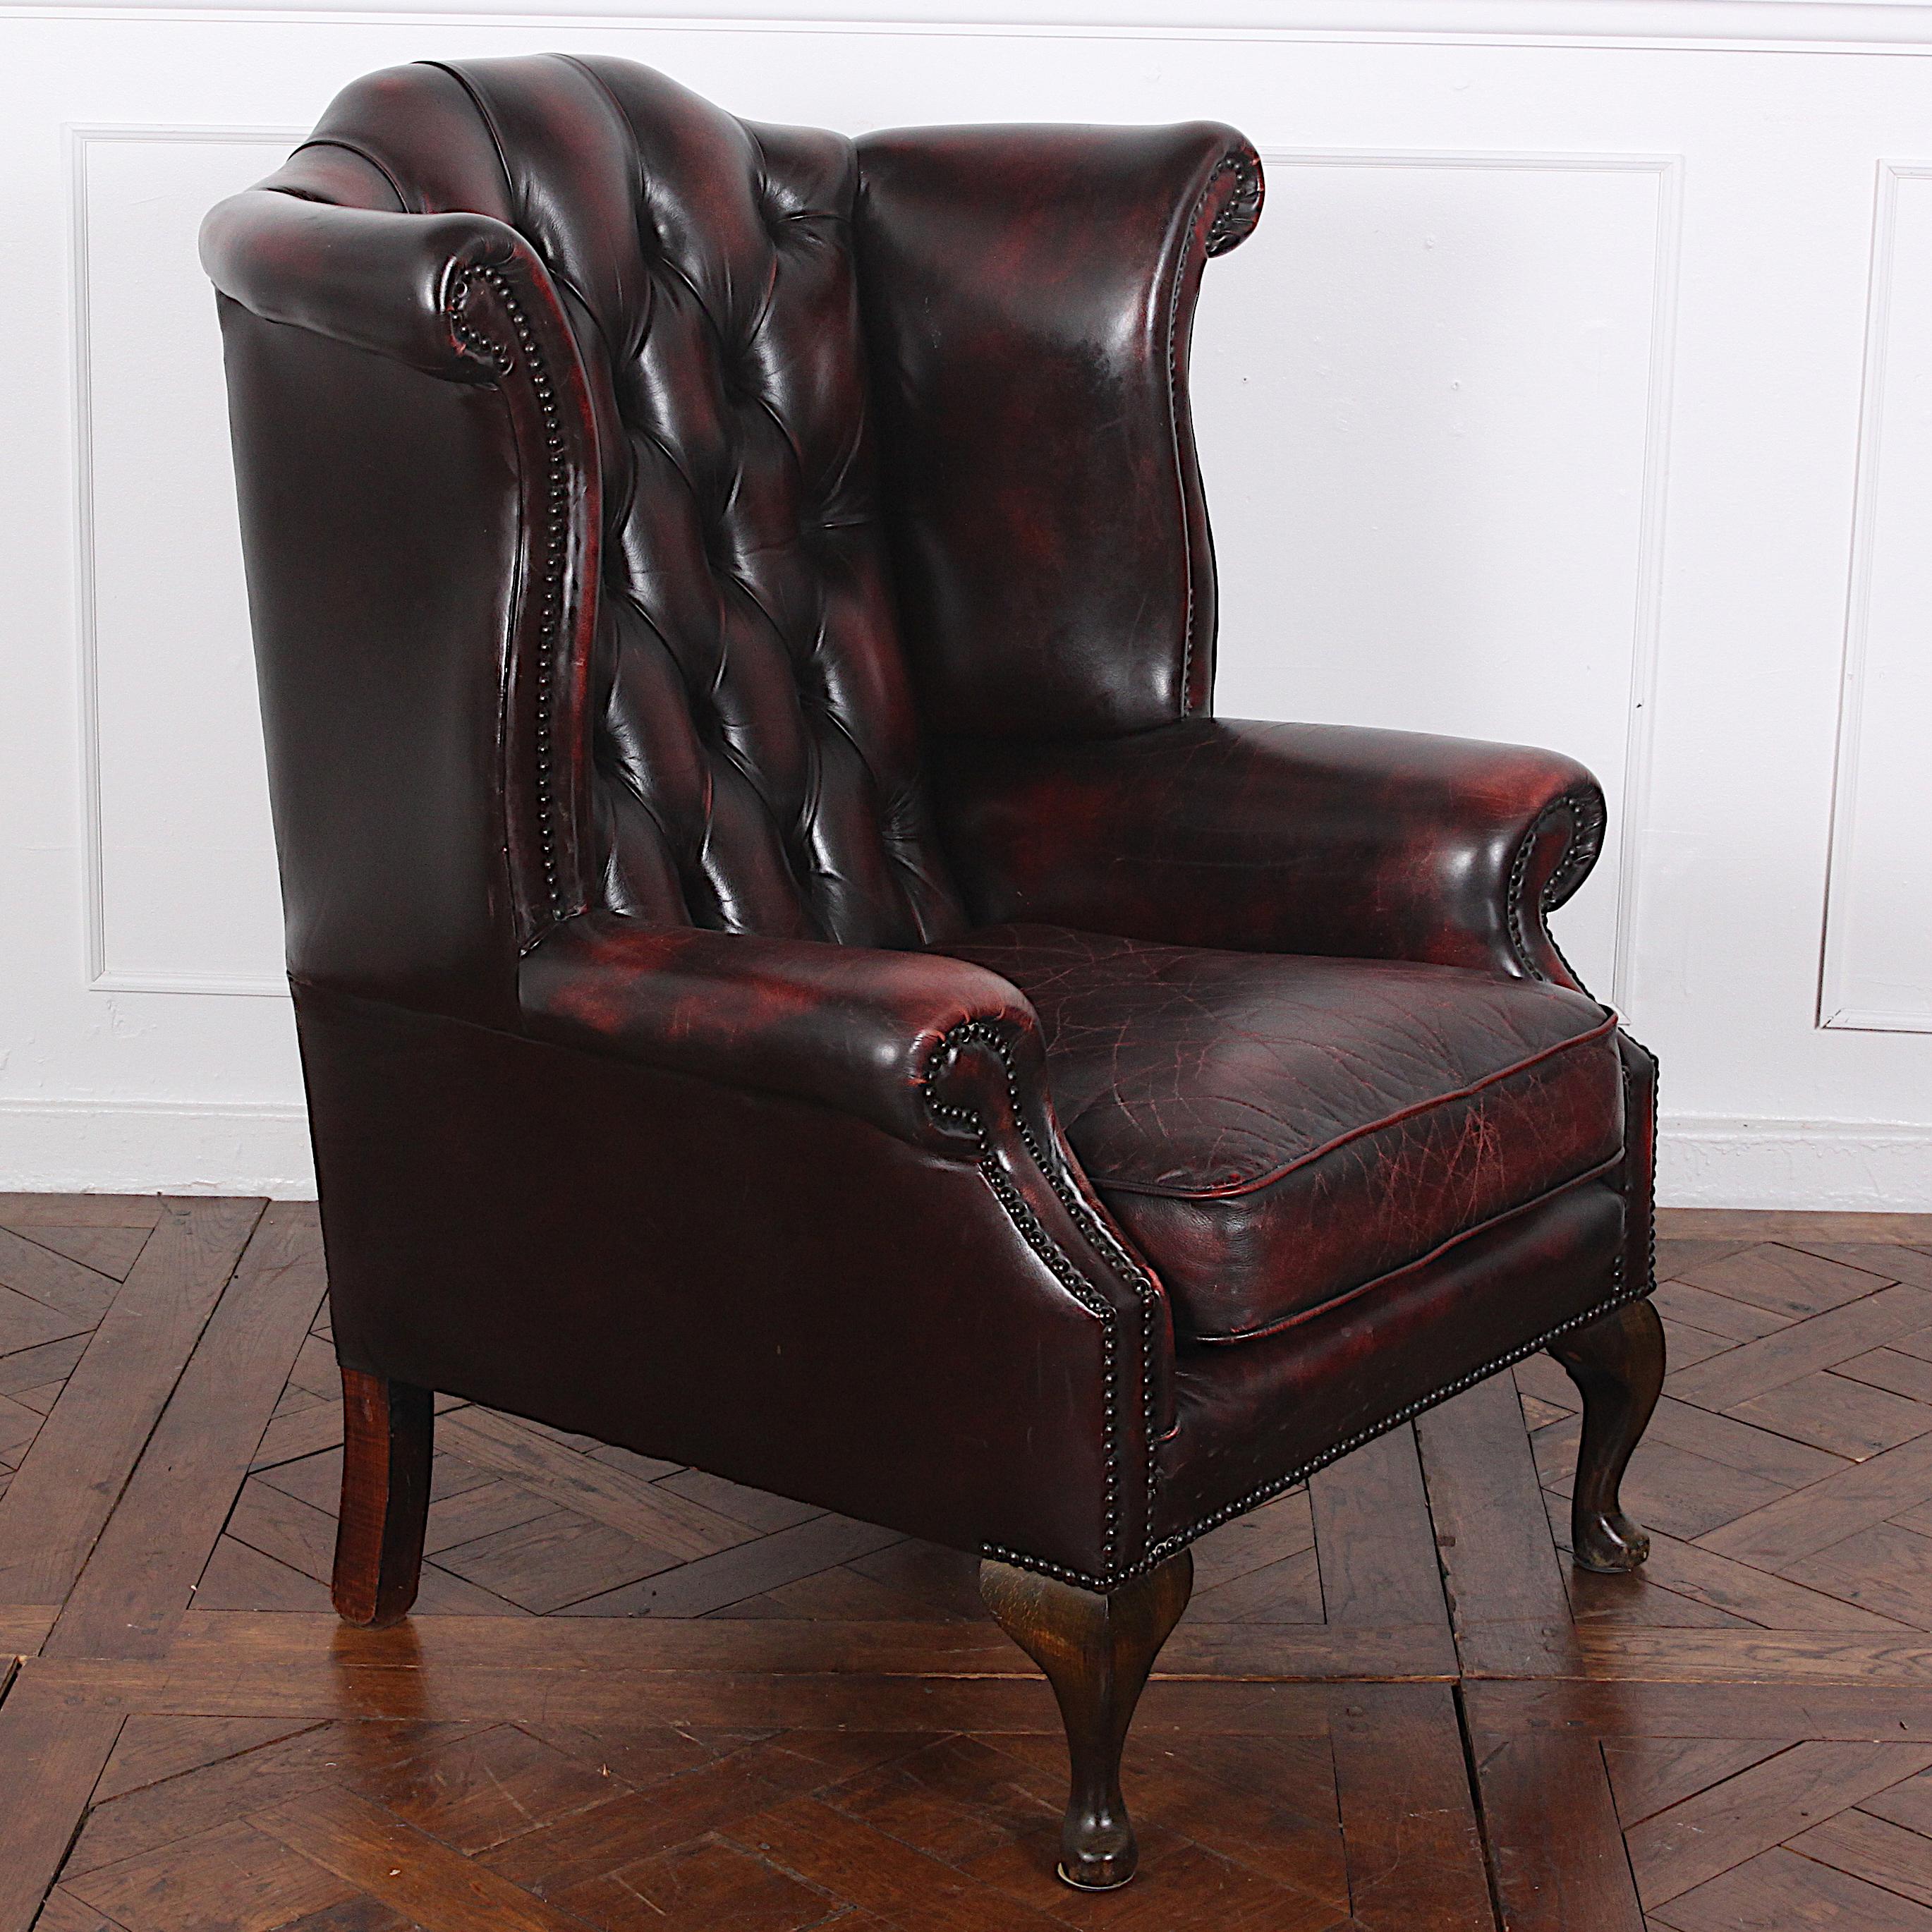 Chesterfield Classic and Elegant British Leather Wingback Chair